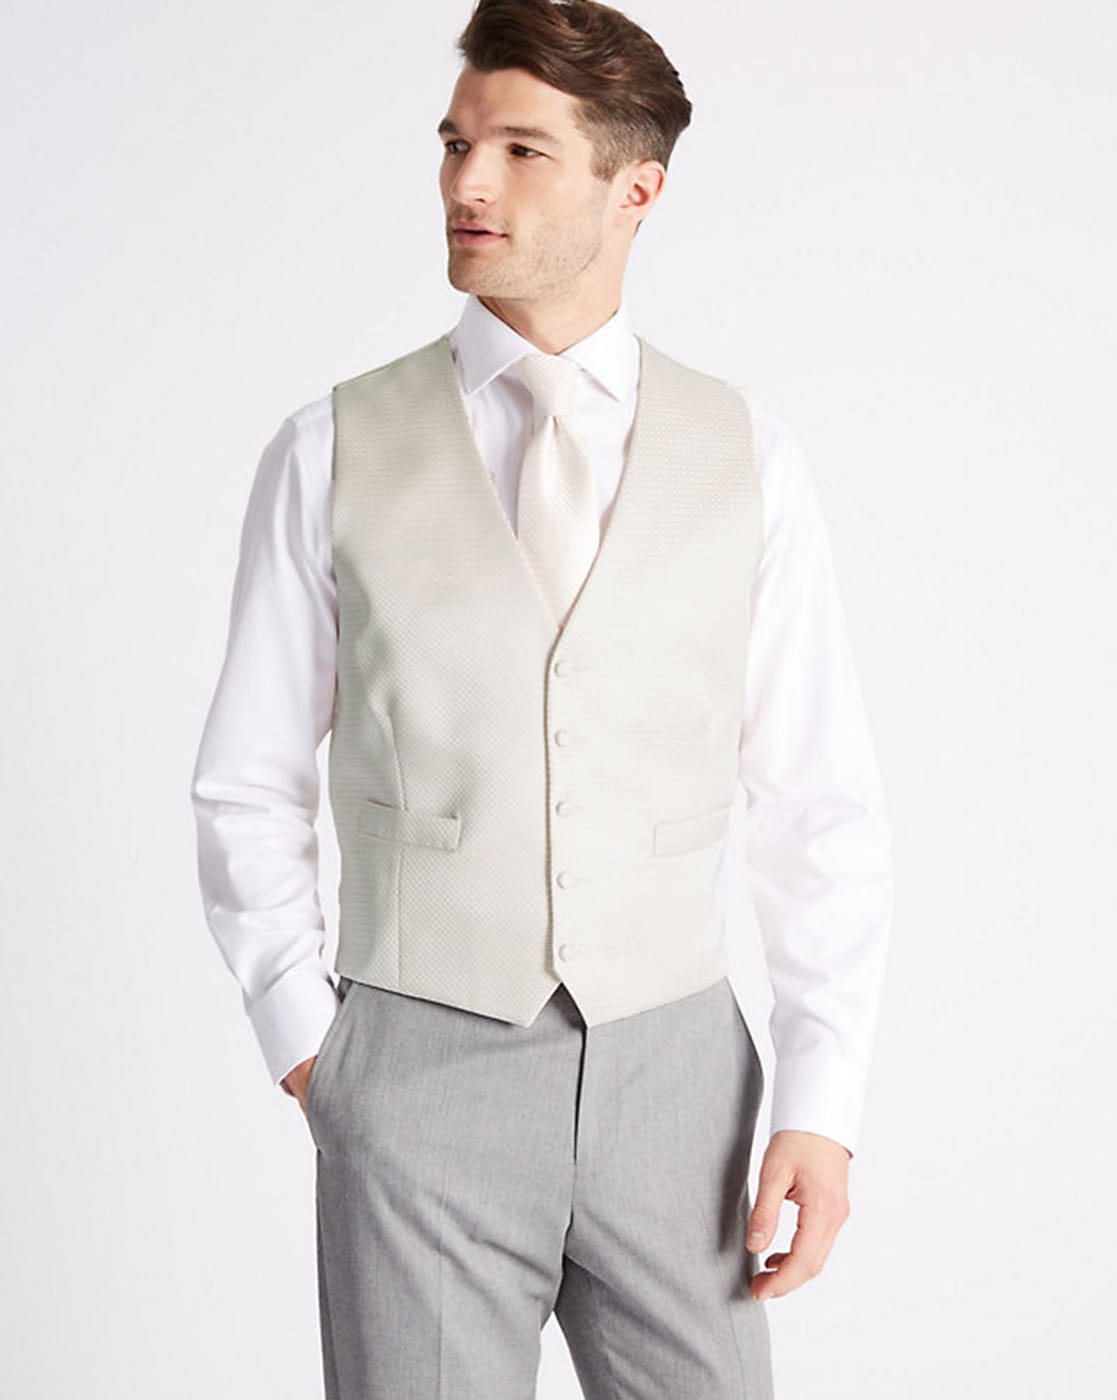 Waistcoats in the color beige on sale  FASHIOLAin